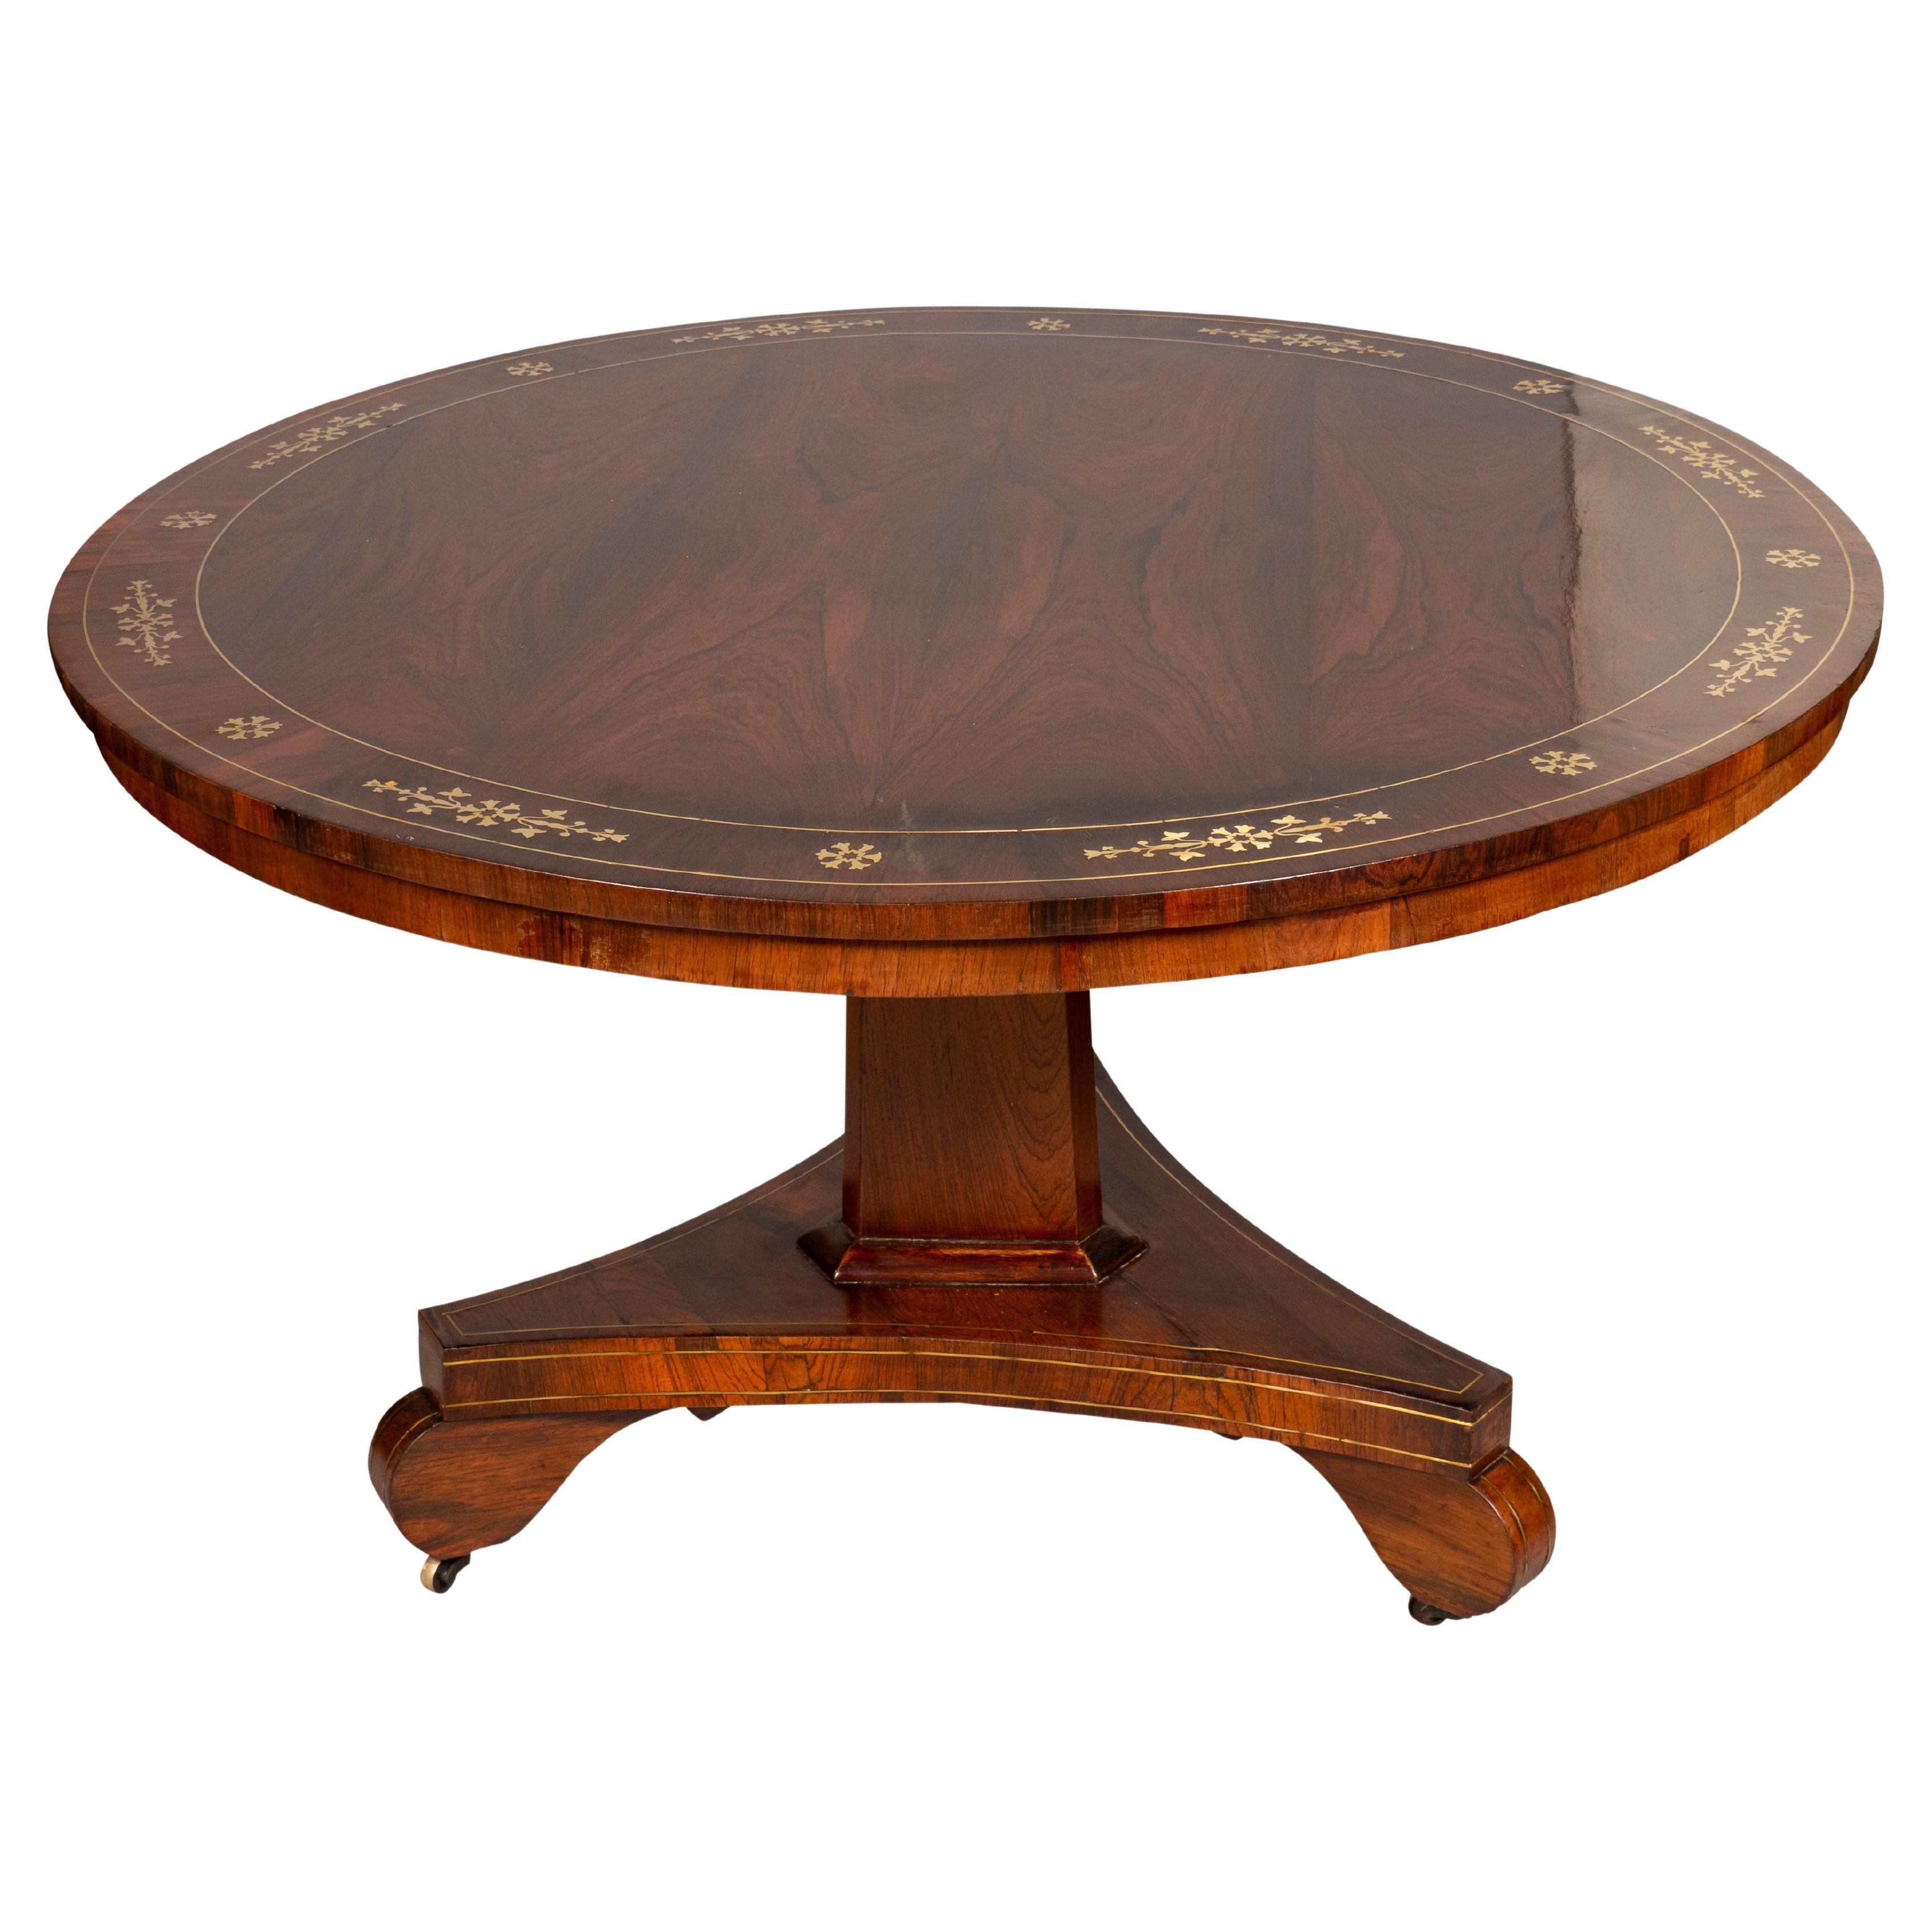 Regency Rosewood and Brass Inlaid Center Table